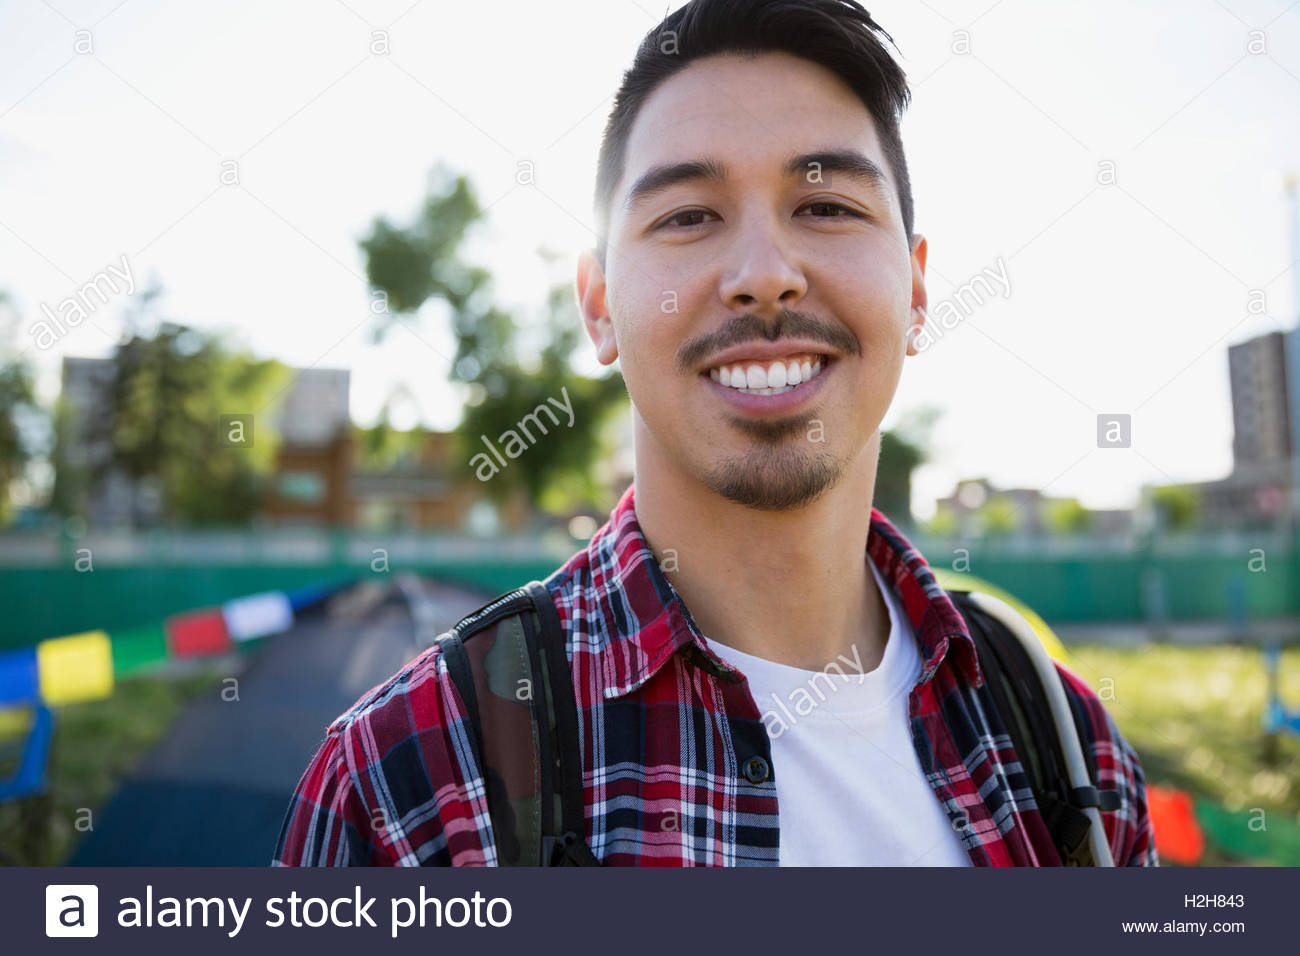 Portrait smiling young man with black hair and stubble smiling at summer music festival campsite Stock Photo